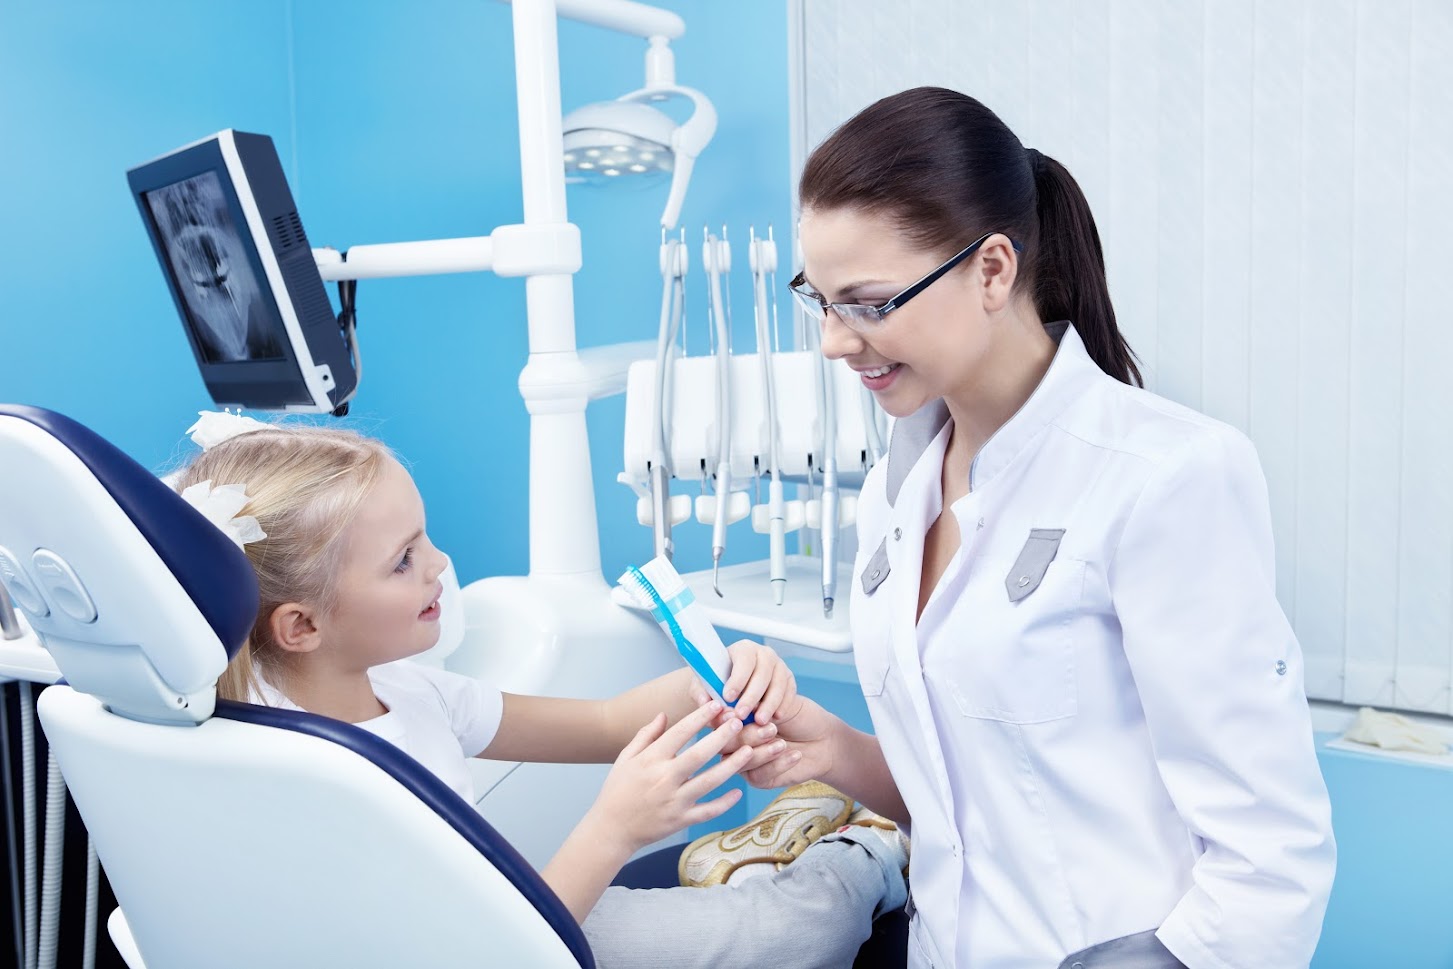 This is the image for the news article titled What to Look for in a Pediatric Dentist: A Guide for Parents